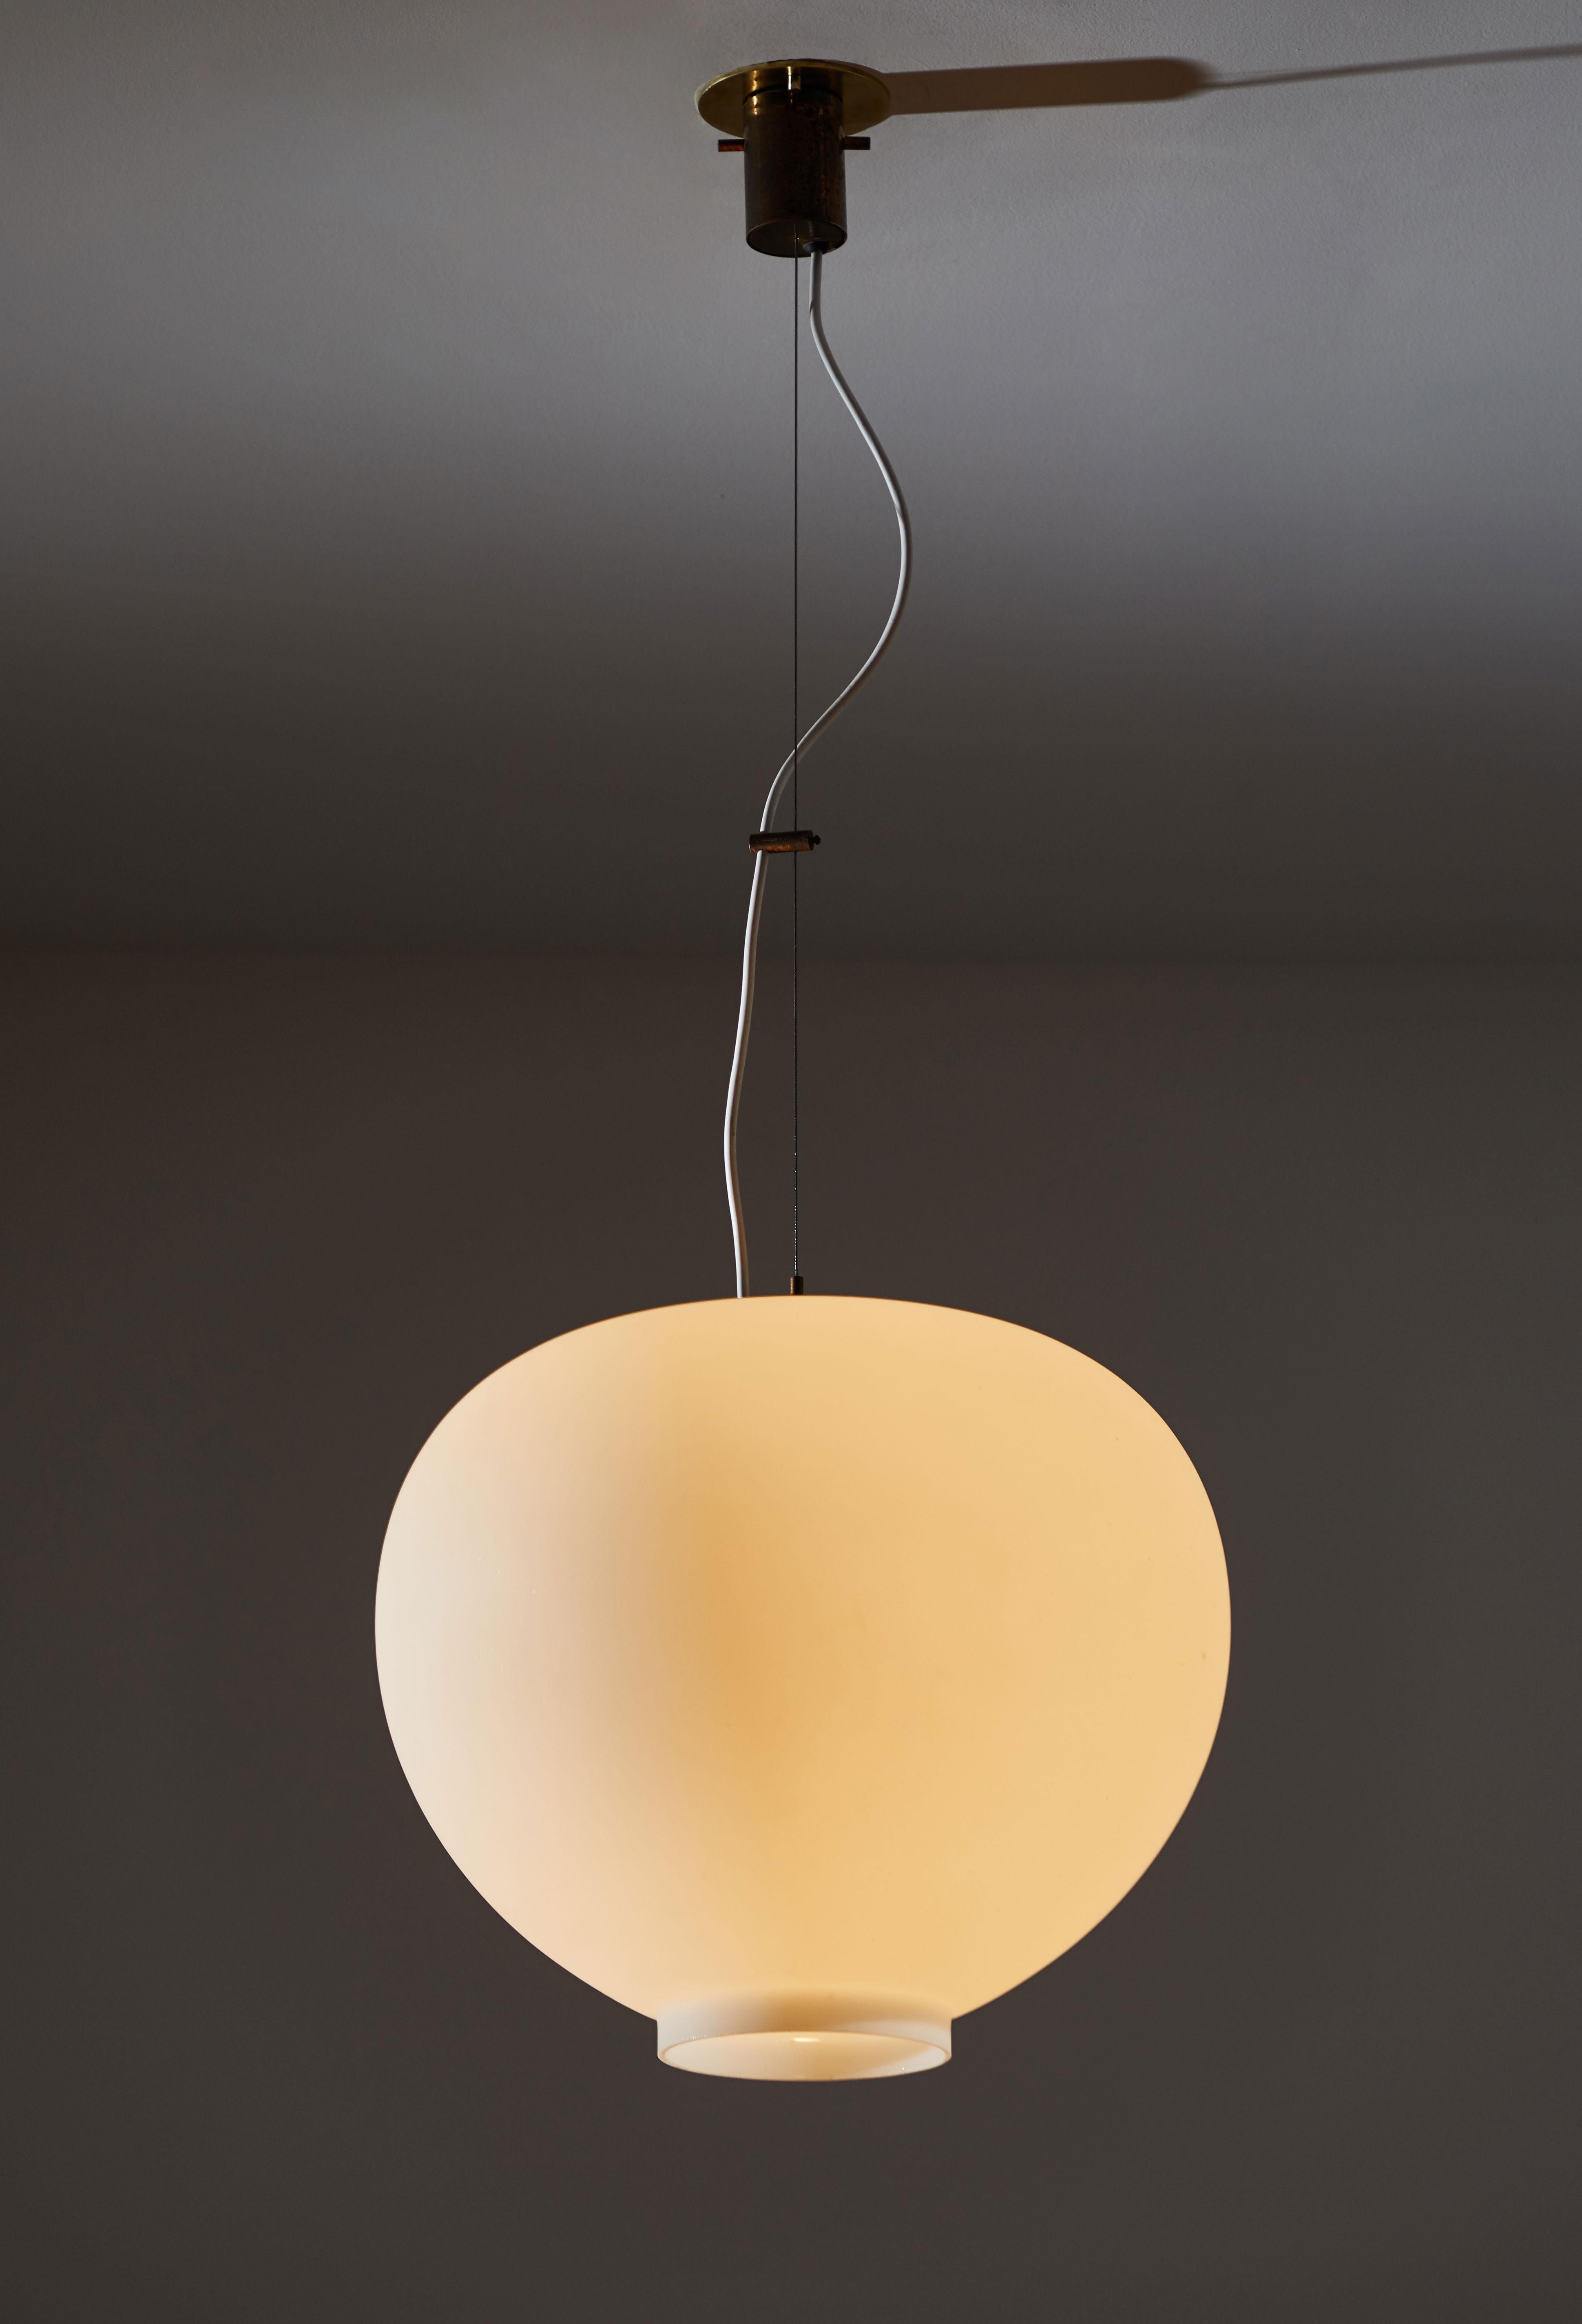 Suspension light by Stilnovo. Manufactured in Italy, circa 1950s. Brushed satin glass diffuser, brass hardware. Custom brass ceiling plate. Original canopy. Rewired for US junction boxes. Maintains original manufacturer's label. Takes one E27 100w